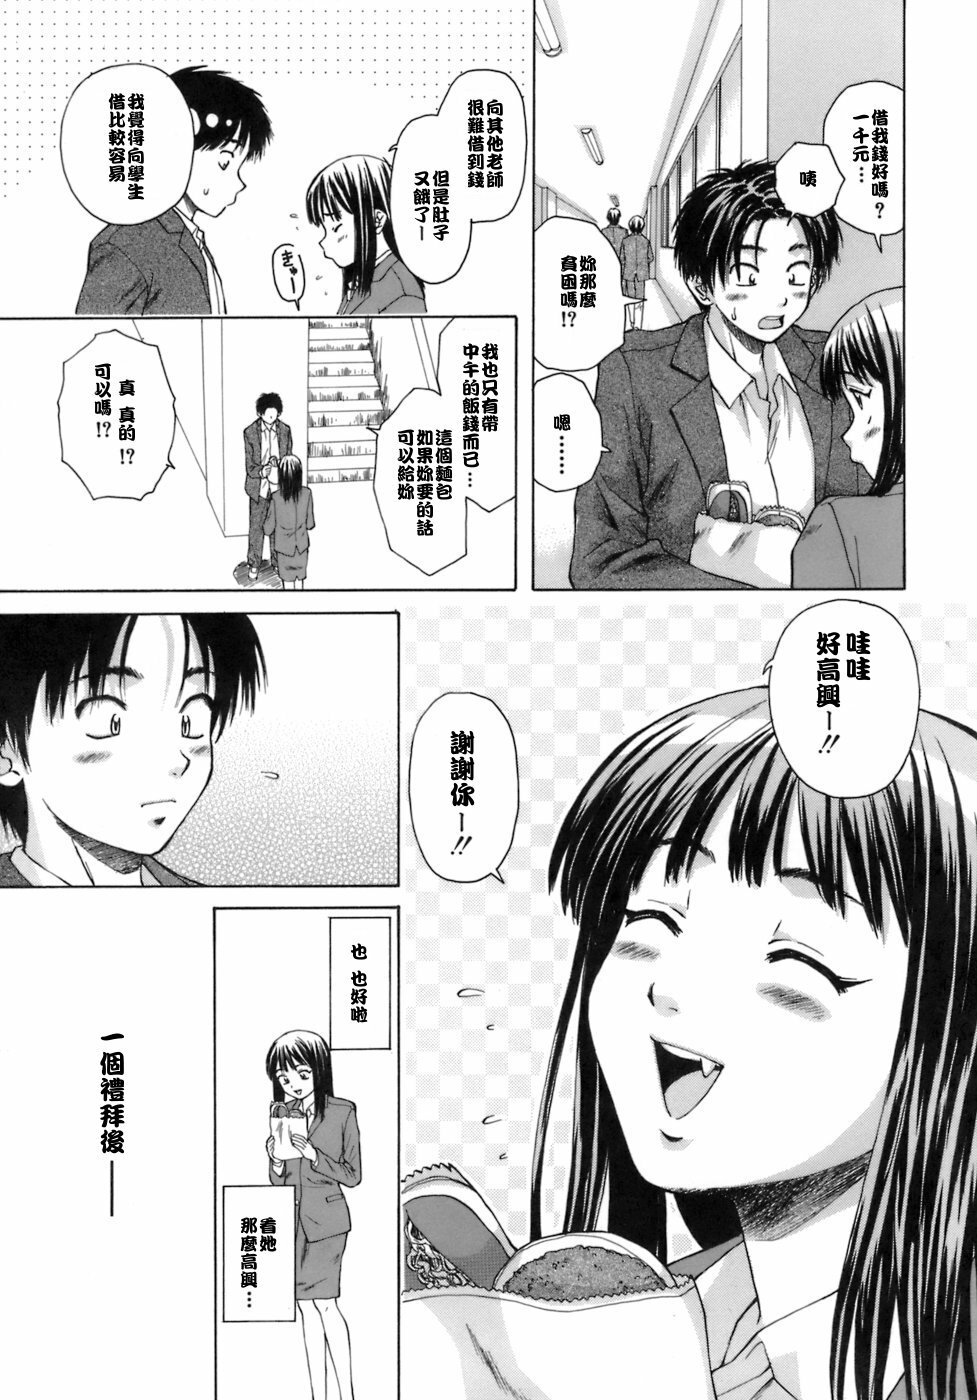 [Fuuga] Kyoushi to Seito to - Teacher and Student [Chinese] [悠月工房] page 18 full